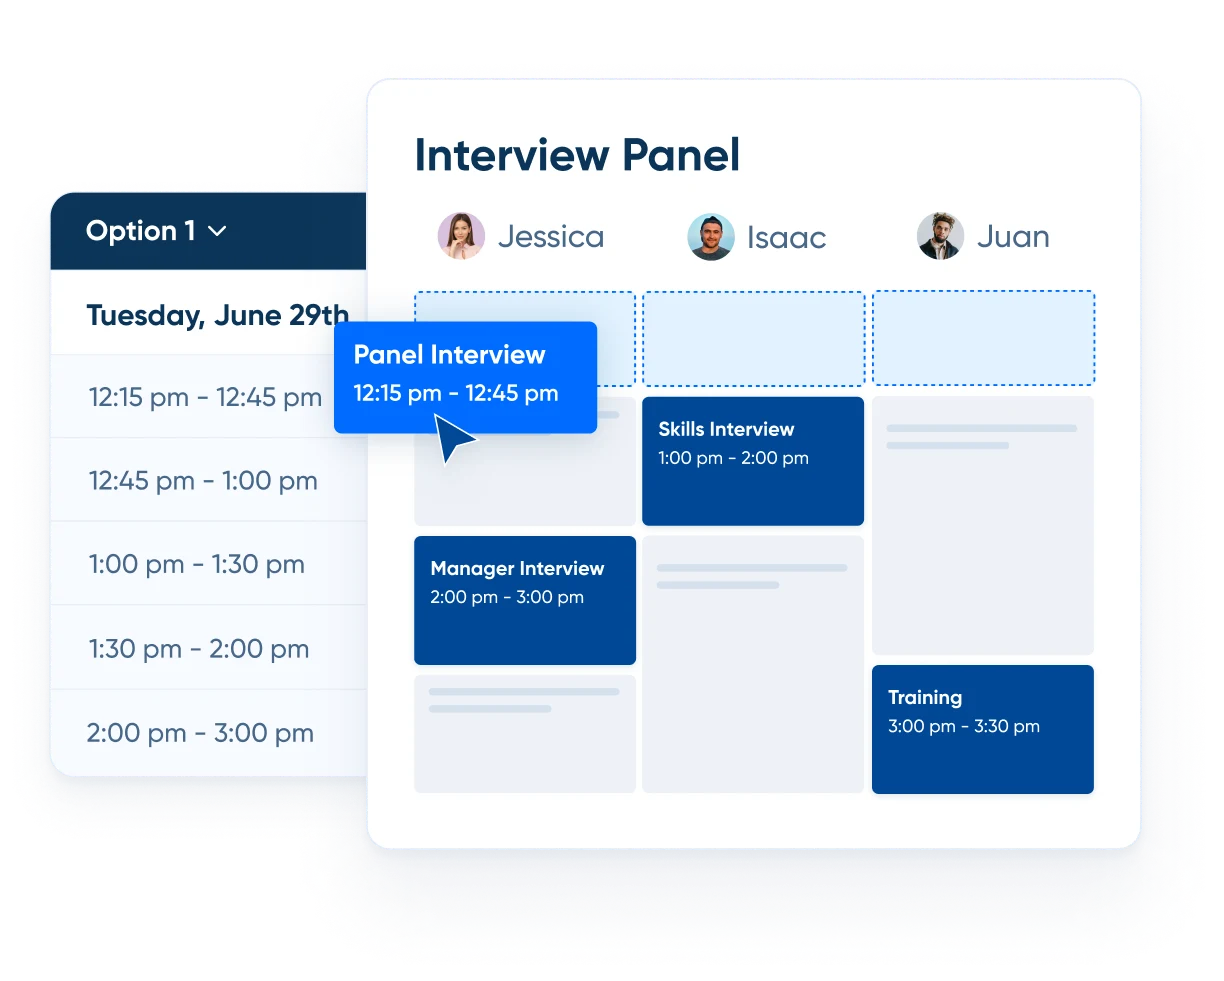 Prelude screenshot showing scheduling options for a panel interview with three interviewers.